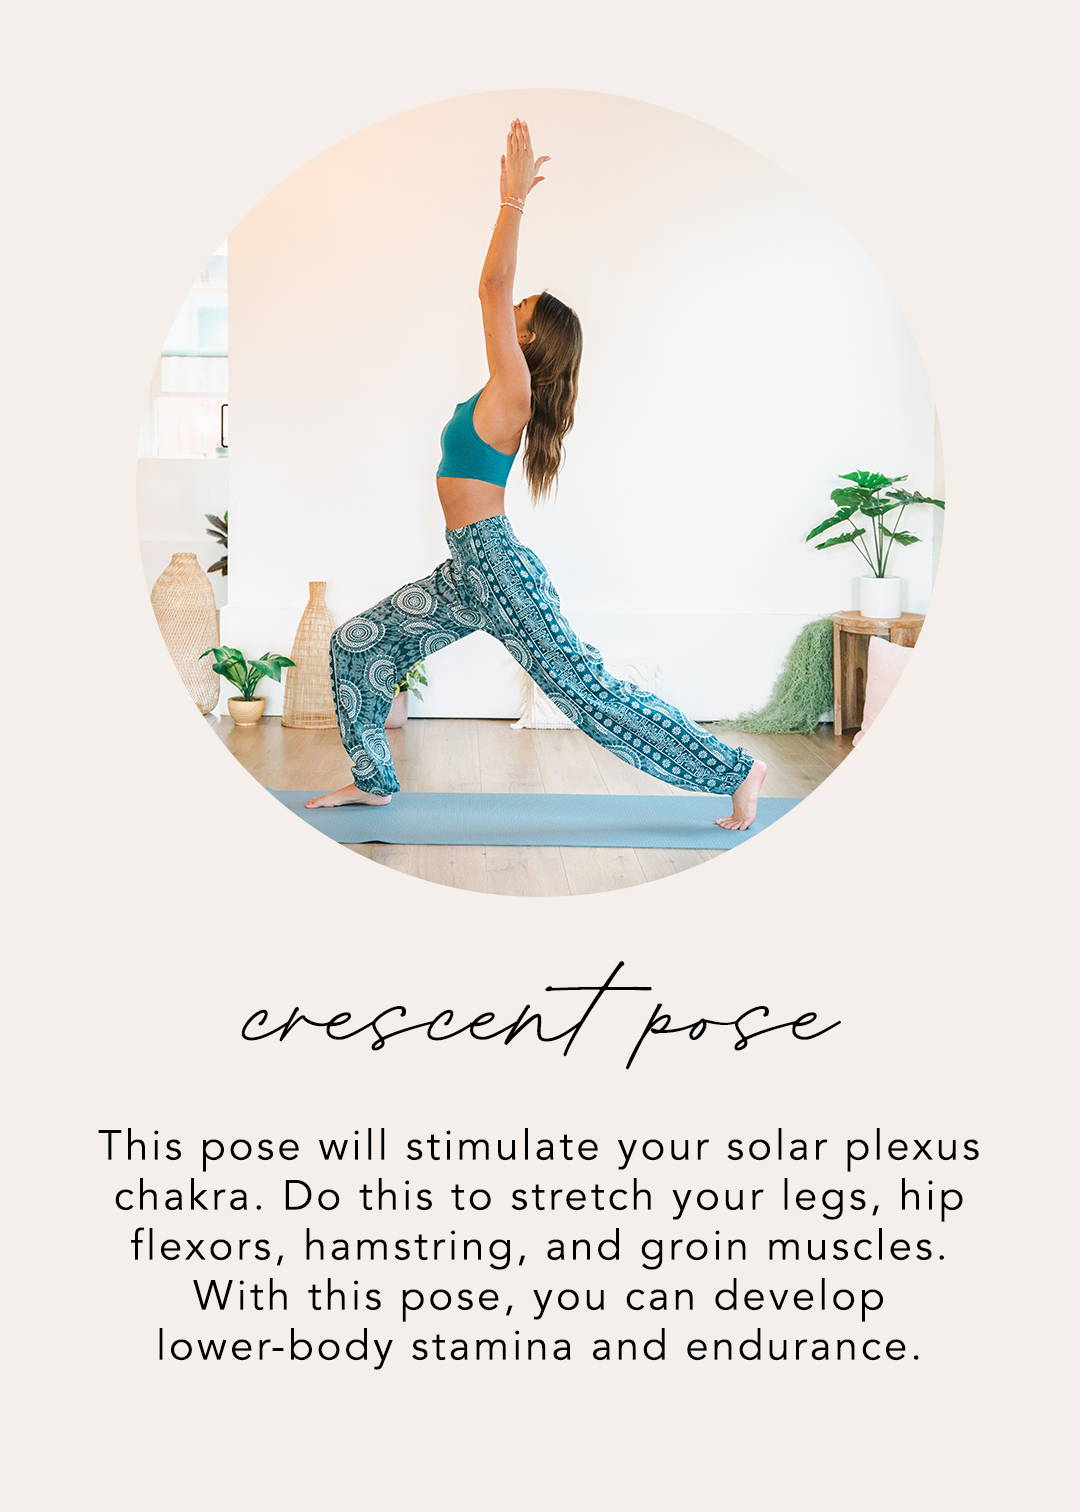 Crescent Pose: This pose will stimulate your solar plexus chakra. Do this to stretch your legs, hip flexors, hamstring, and groin muscles. With those pose, you can develop lower-body stamina and endurance.